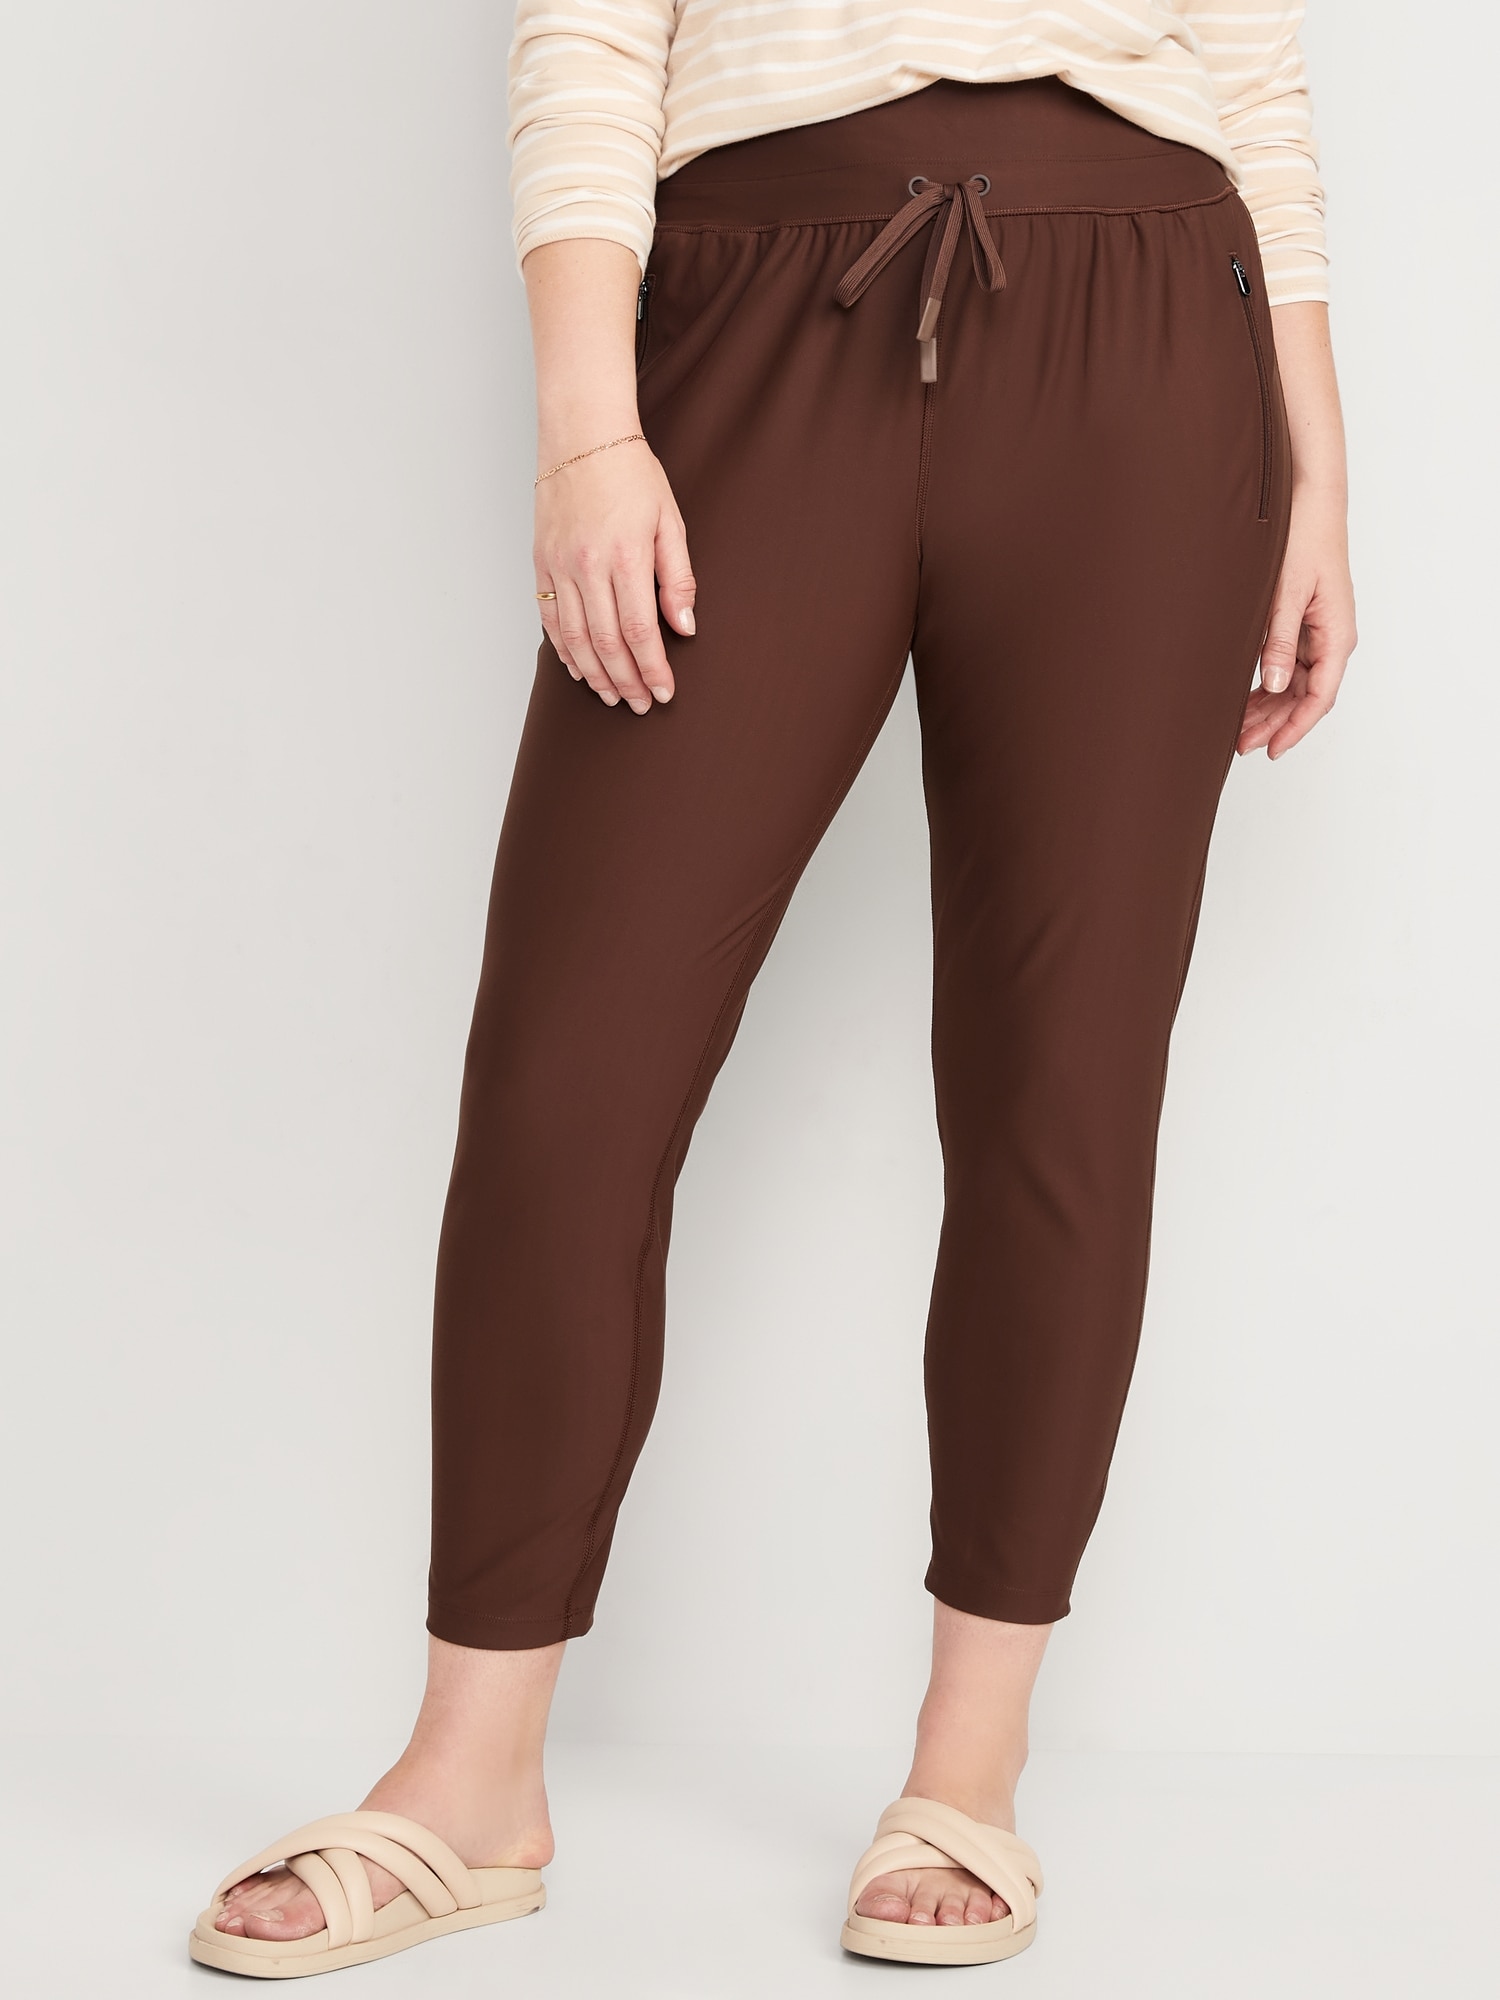 High-Waisted Twill Jogger Pants for Women, Old Navy